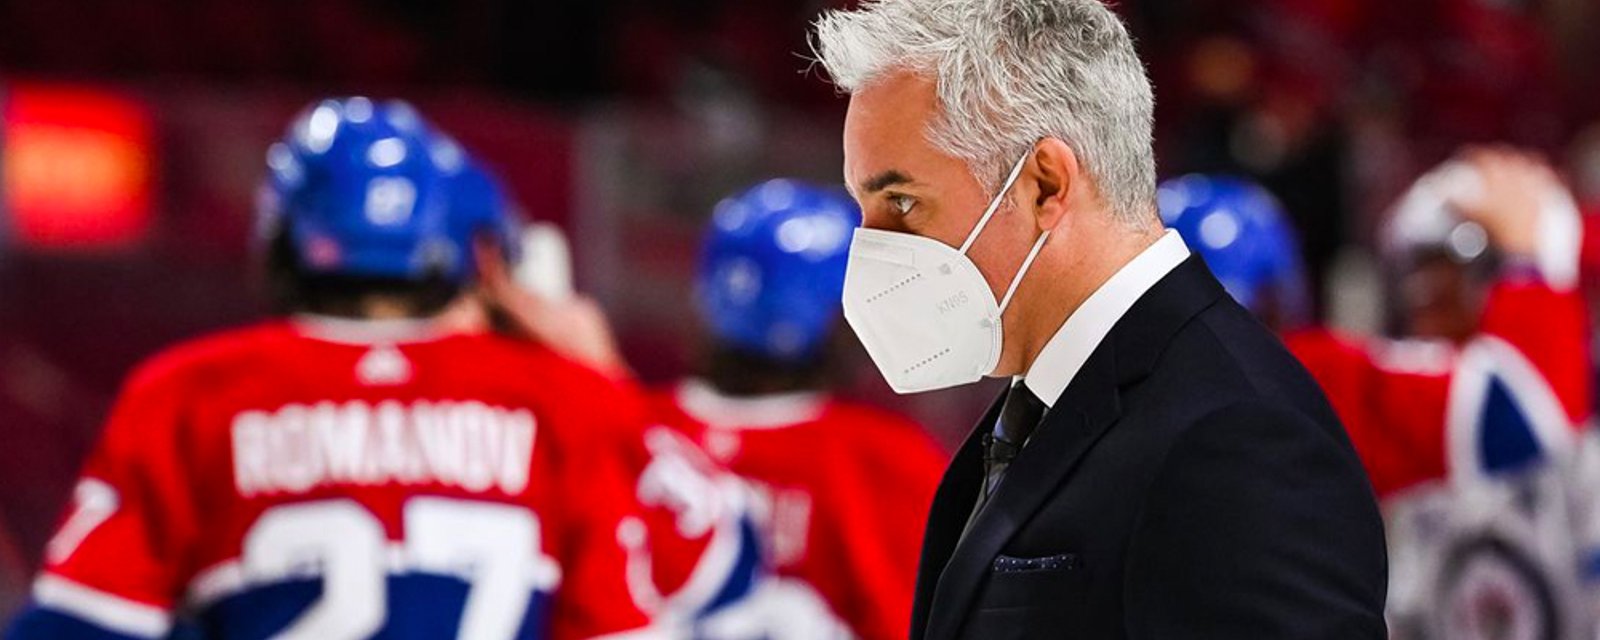 Habs officially promote Ducharme to permanent head coach